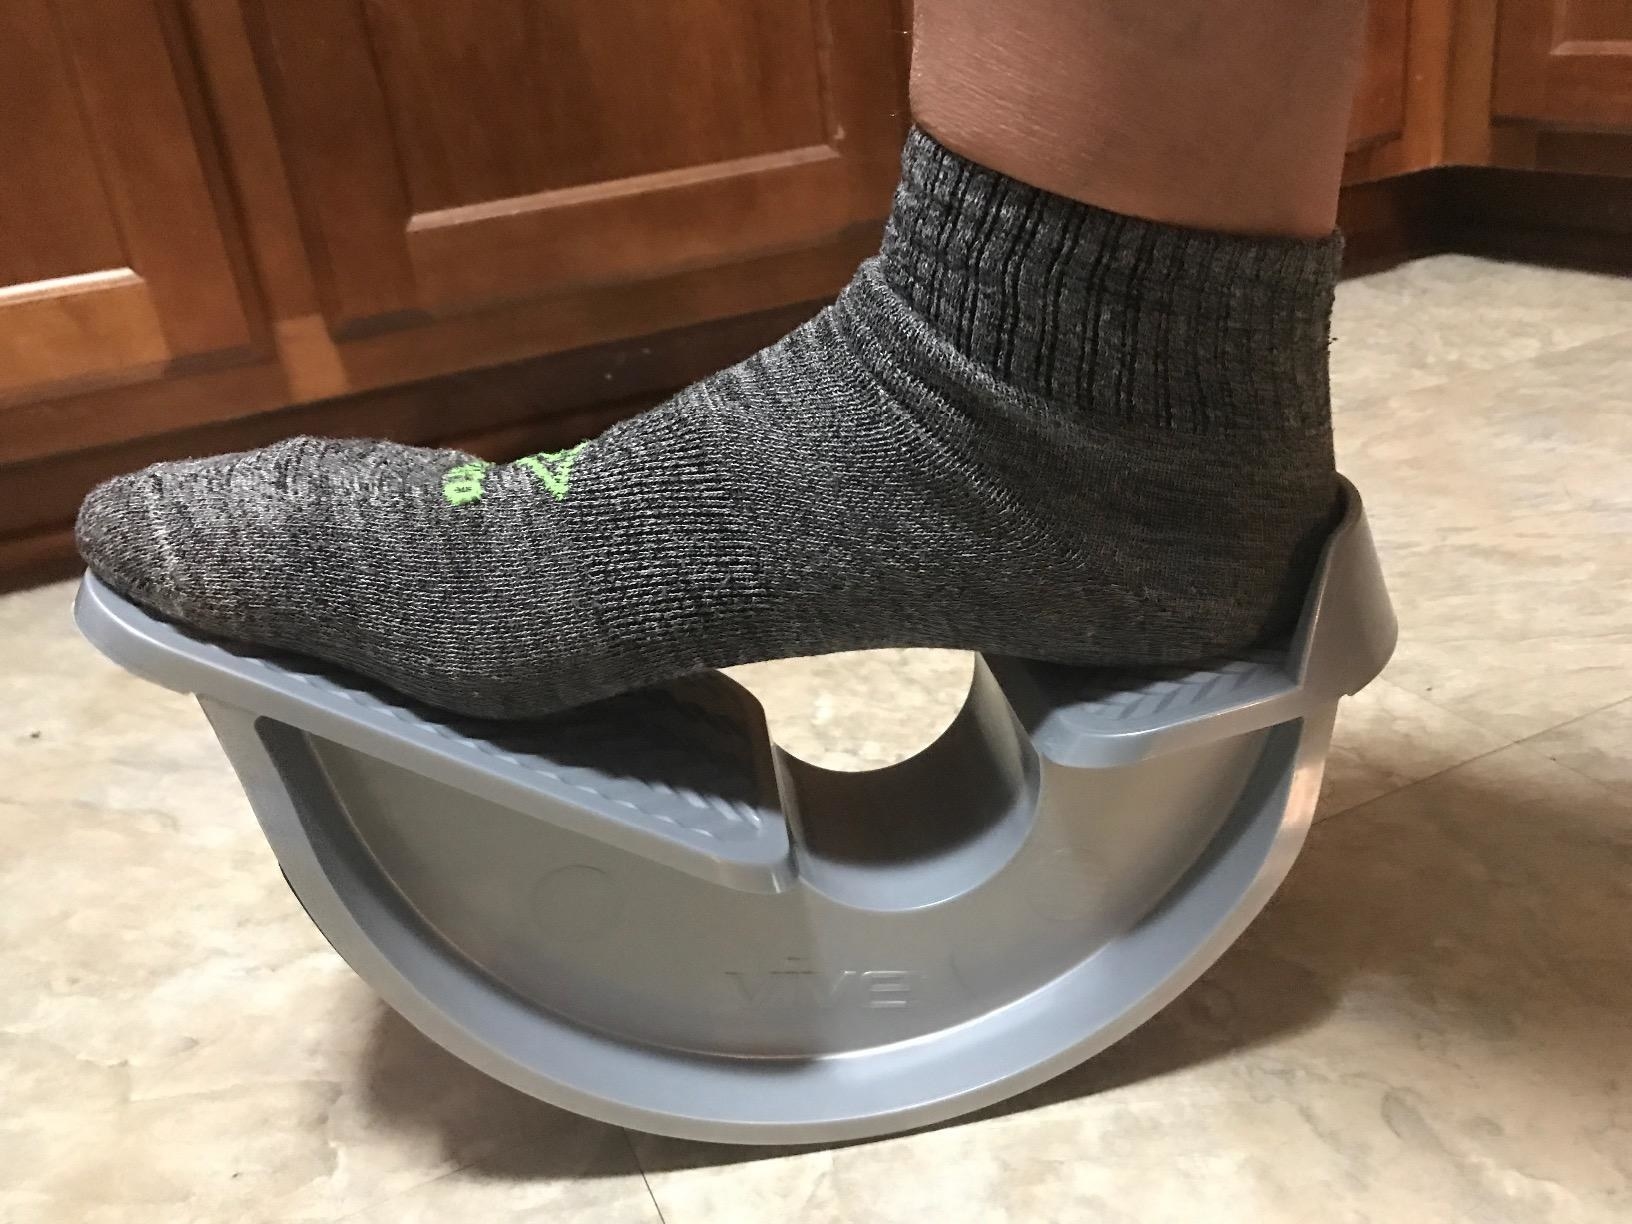 A reviewer&#x27;s foot resting on the semi-circle shaped rocker